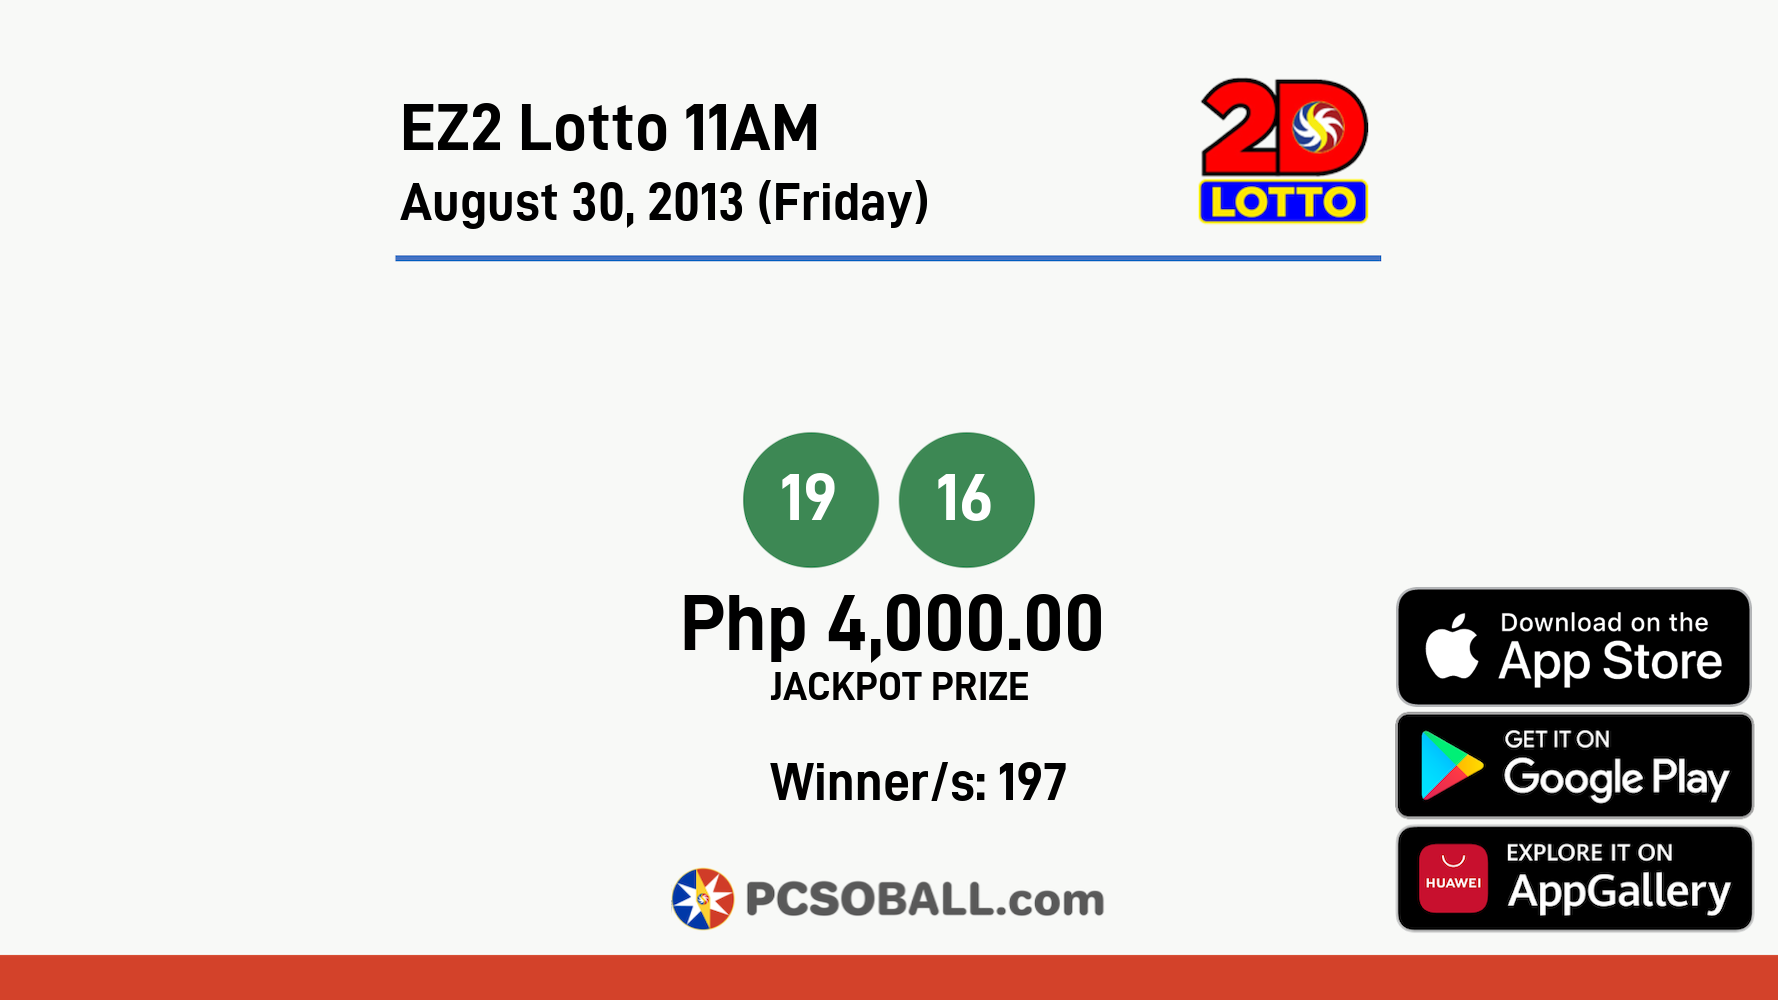 EZ2 Lotto 11AM August 30, 2013 (Friday) Result